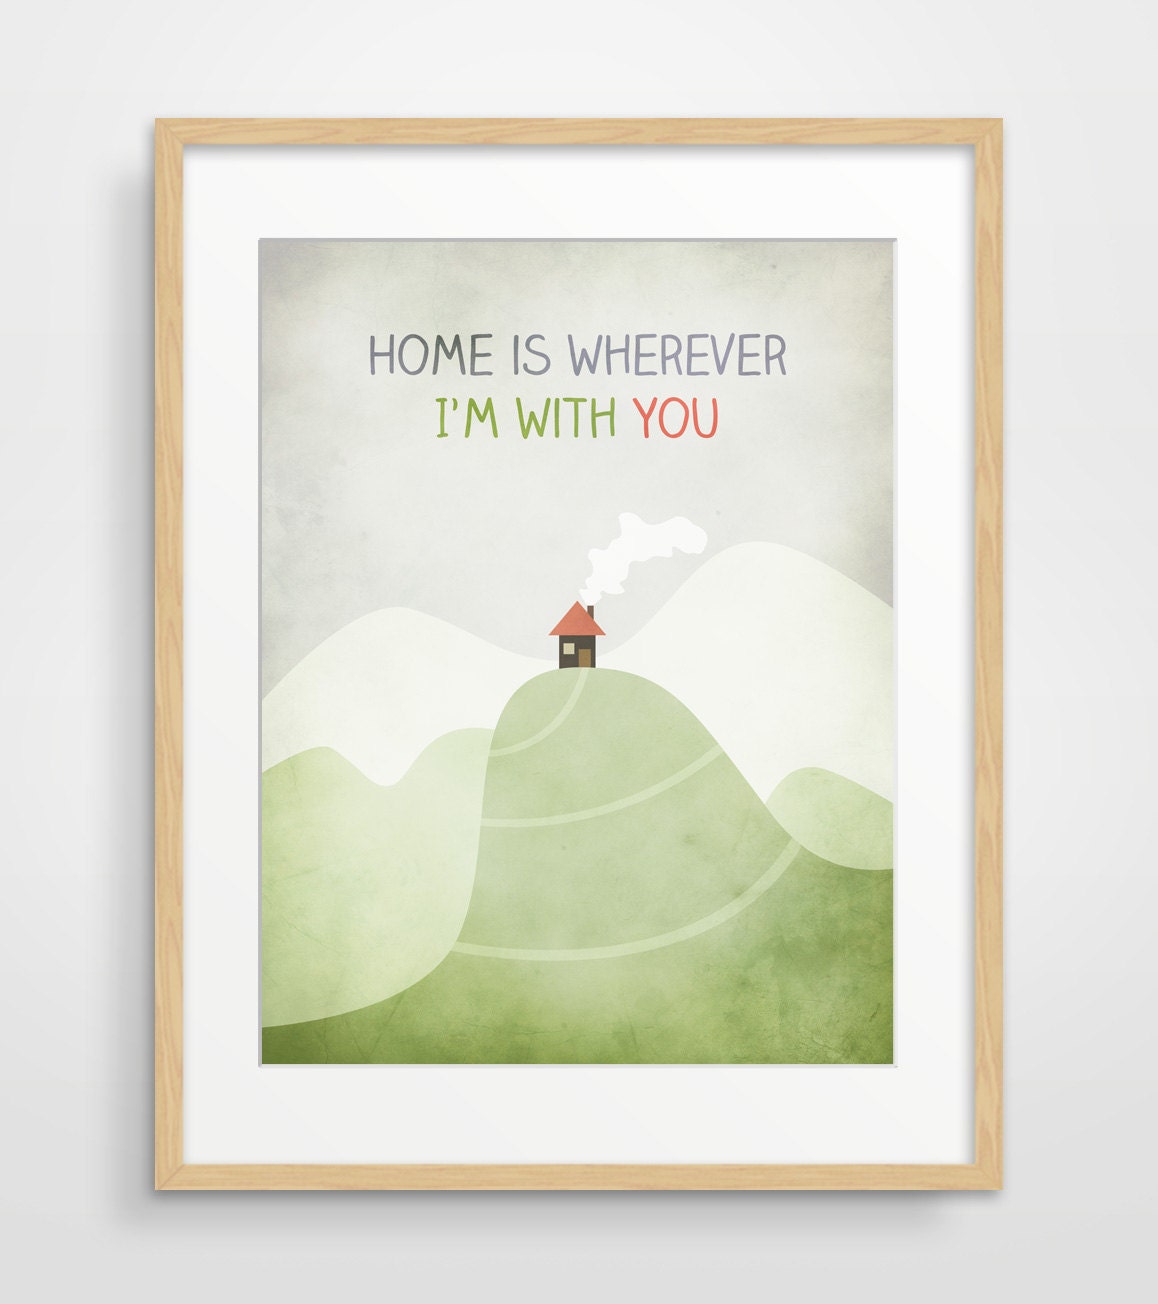 Home is wherever I'm with you, Love Art Print, Typography Print, Housewarming Gift, Valentine Day - evesand